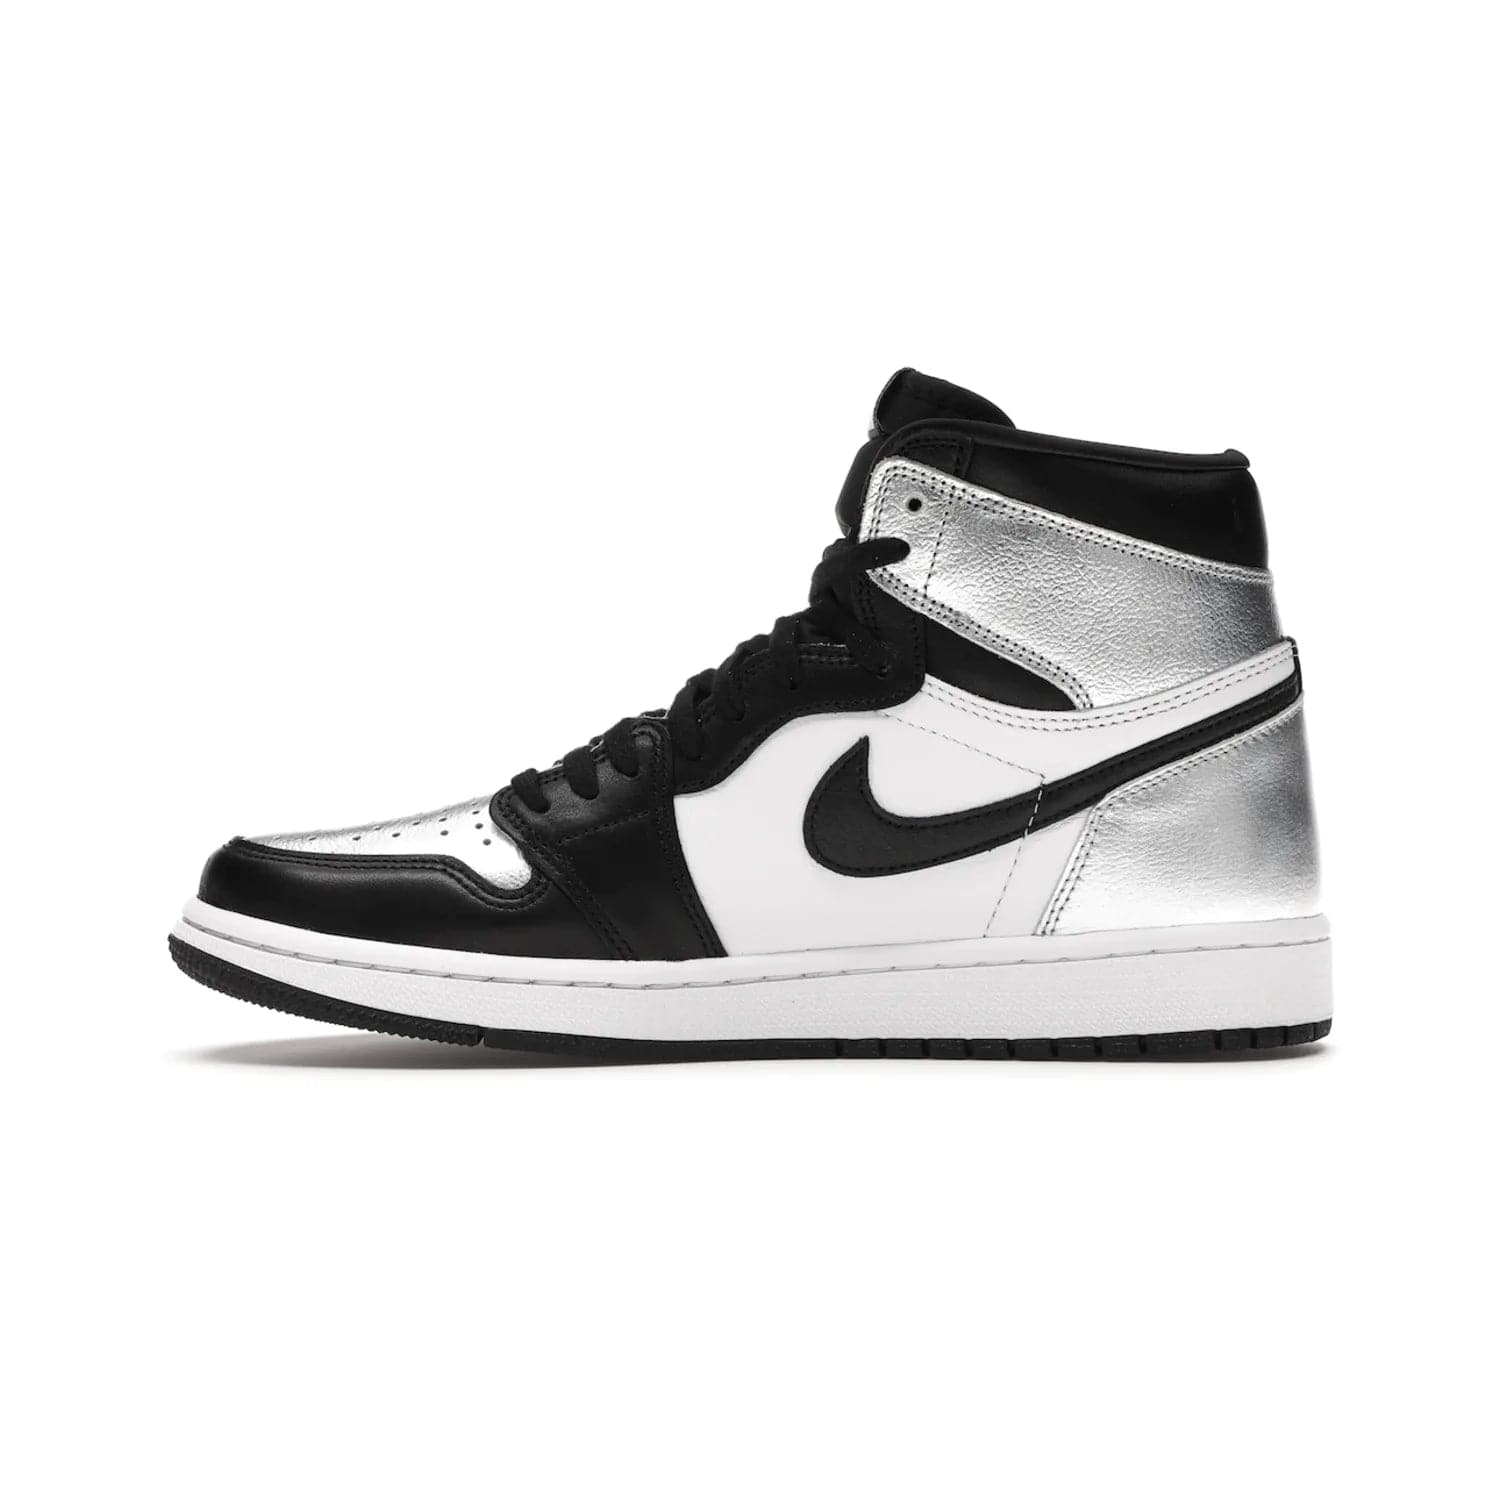 Jordan 1 Retro High Silver Toe (Women's) - Image 19 - Only at www.BallersClubKickz.com - Introducing the Jordan 1 Retro High Silver Toe (Women's): an updated spin on the iconic 'Black Toe' theme. Featuring white & black leather and silver patent leather construction. Nike Air branding, Air Jordan Wings logo, and white/black sole finish give a classic look. The perfect addition to an on-trend streetwear look. Available in classic black & white, this Jordan 1 is an instant classic. Released in February 20